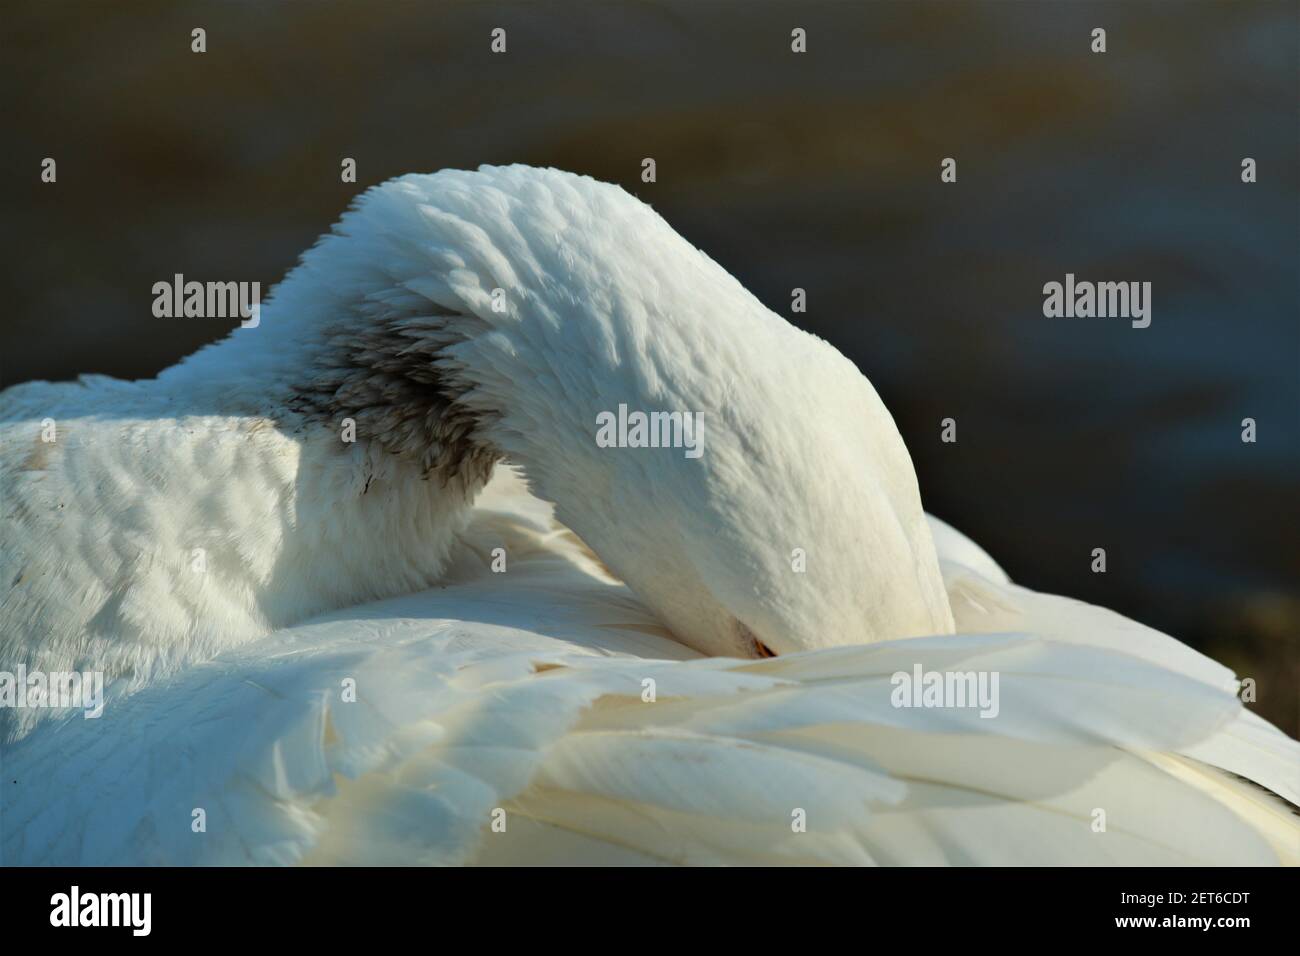 Close up of a white goose cleaning her plumage on the back Stock Photo